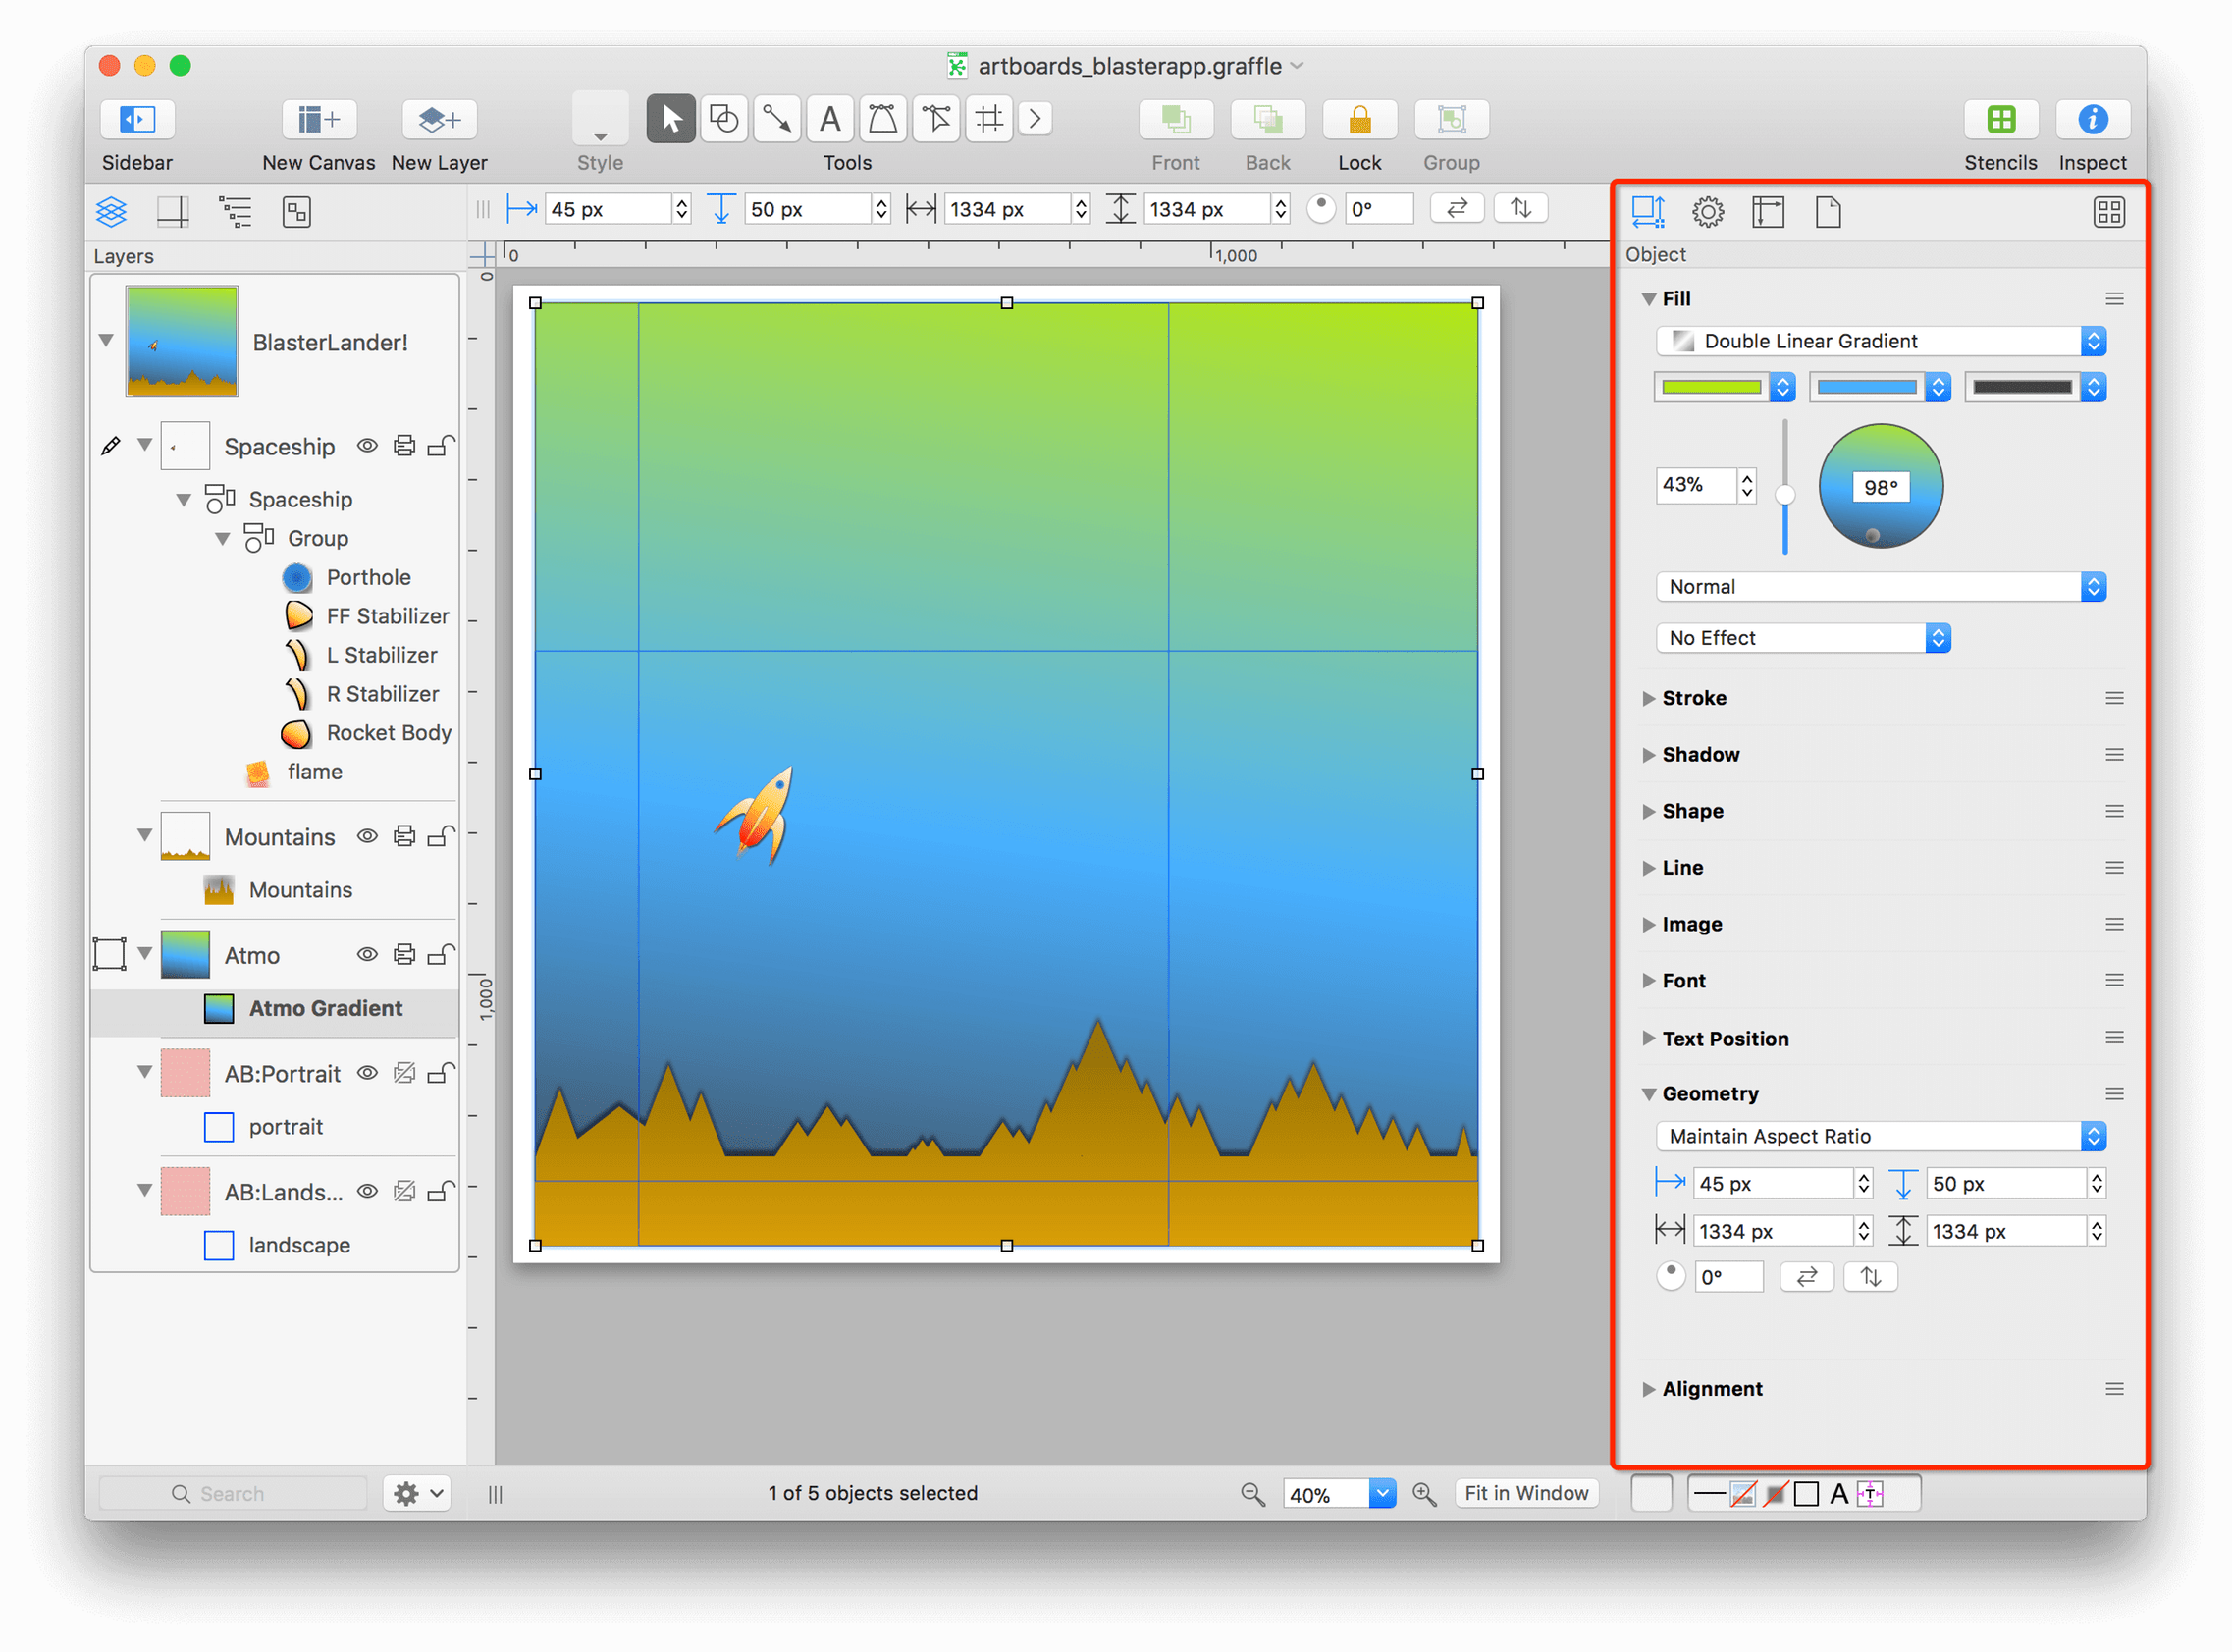 The inspectors are actually contained by the Sidebar workspace, which docks the inspectors in OmniGraffle's window, to the right of the canvas.